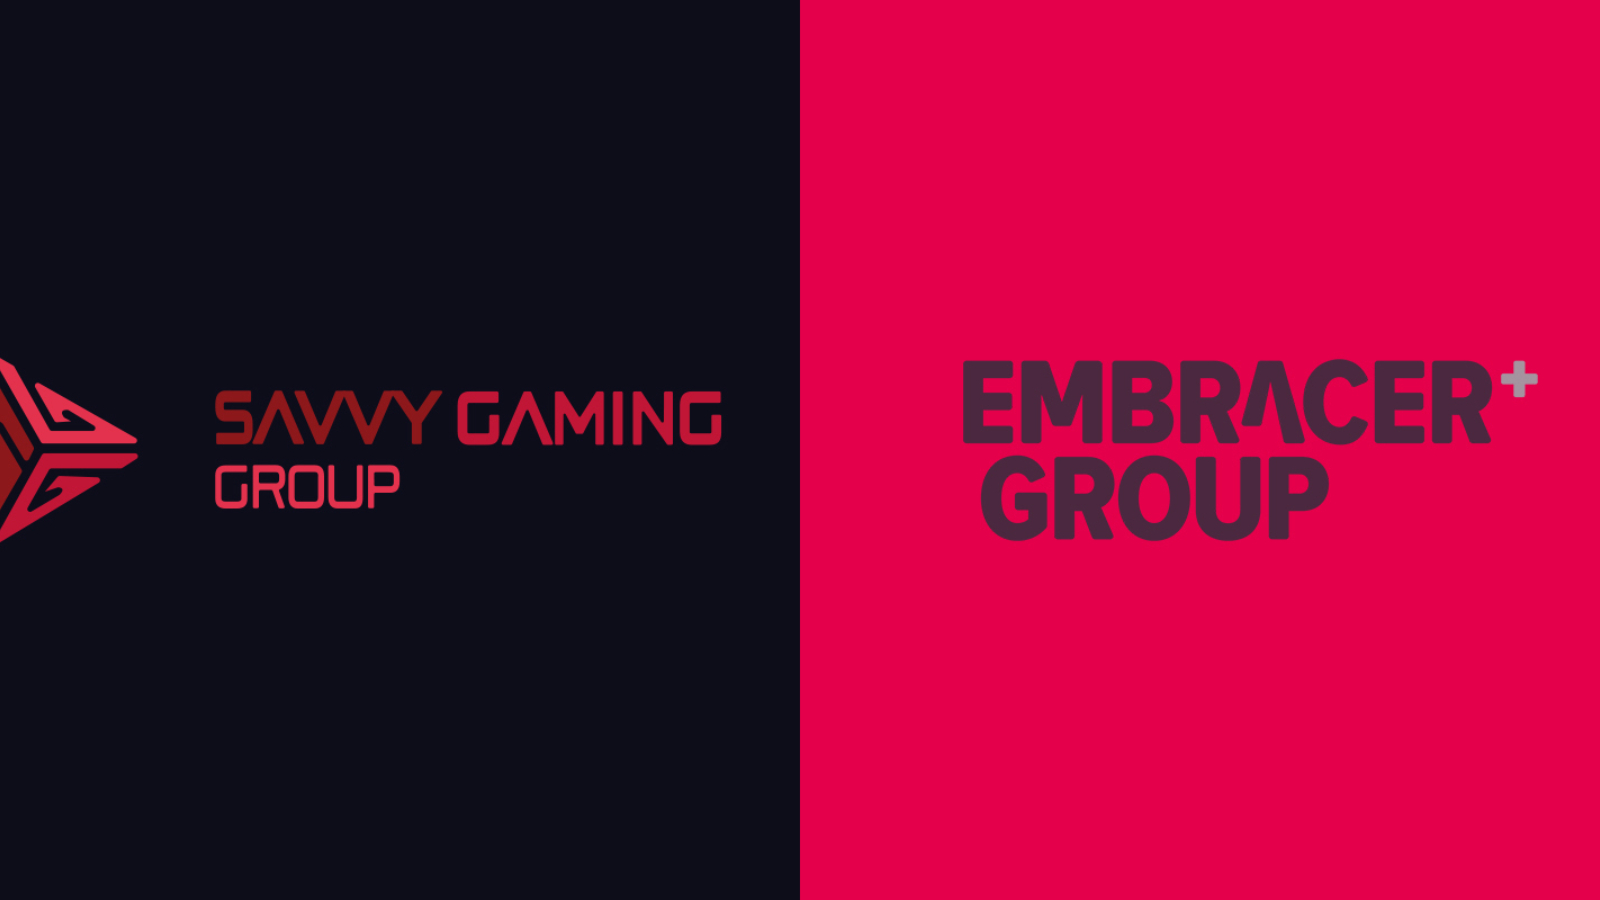 Embracer Group and Savvy Games' failed deal was the start of things going south.